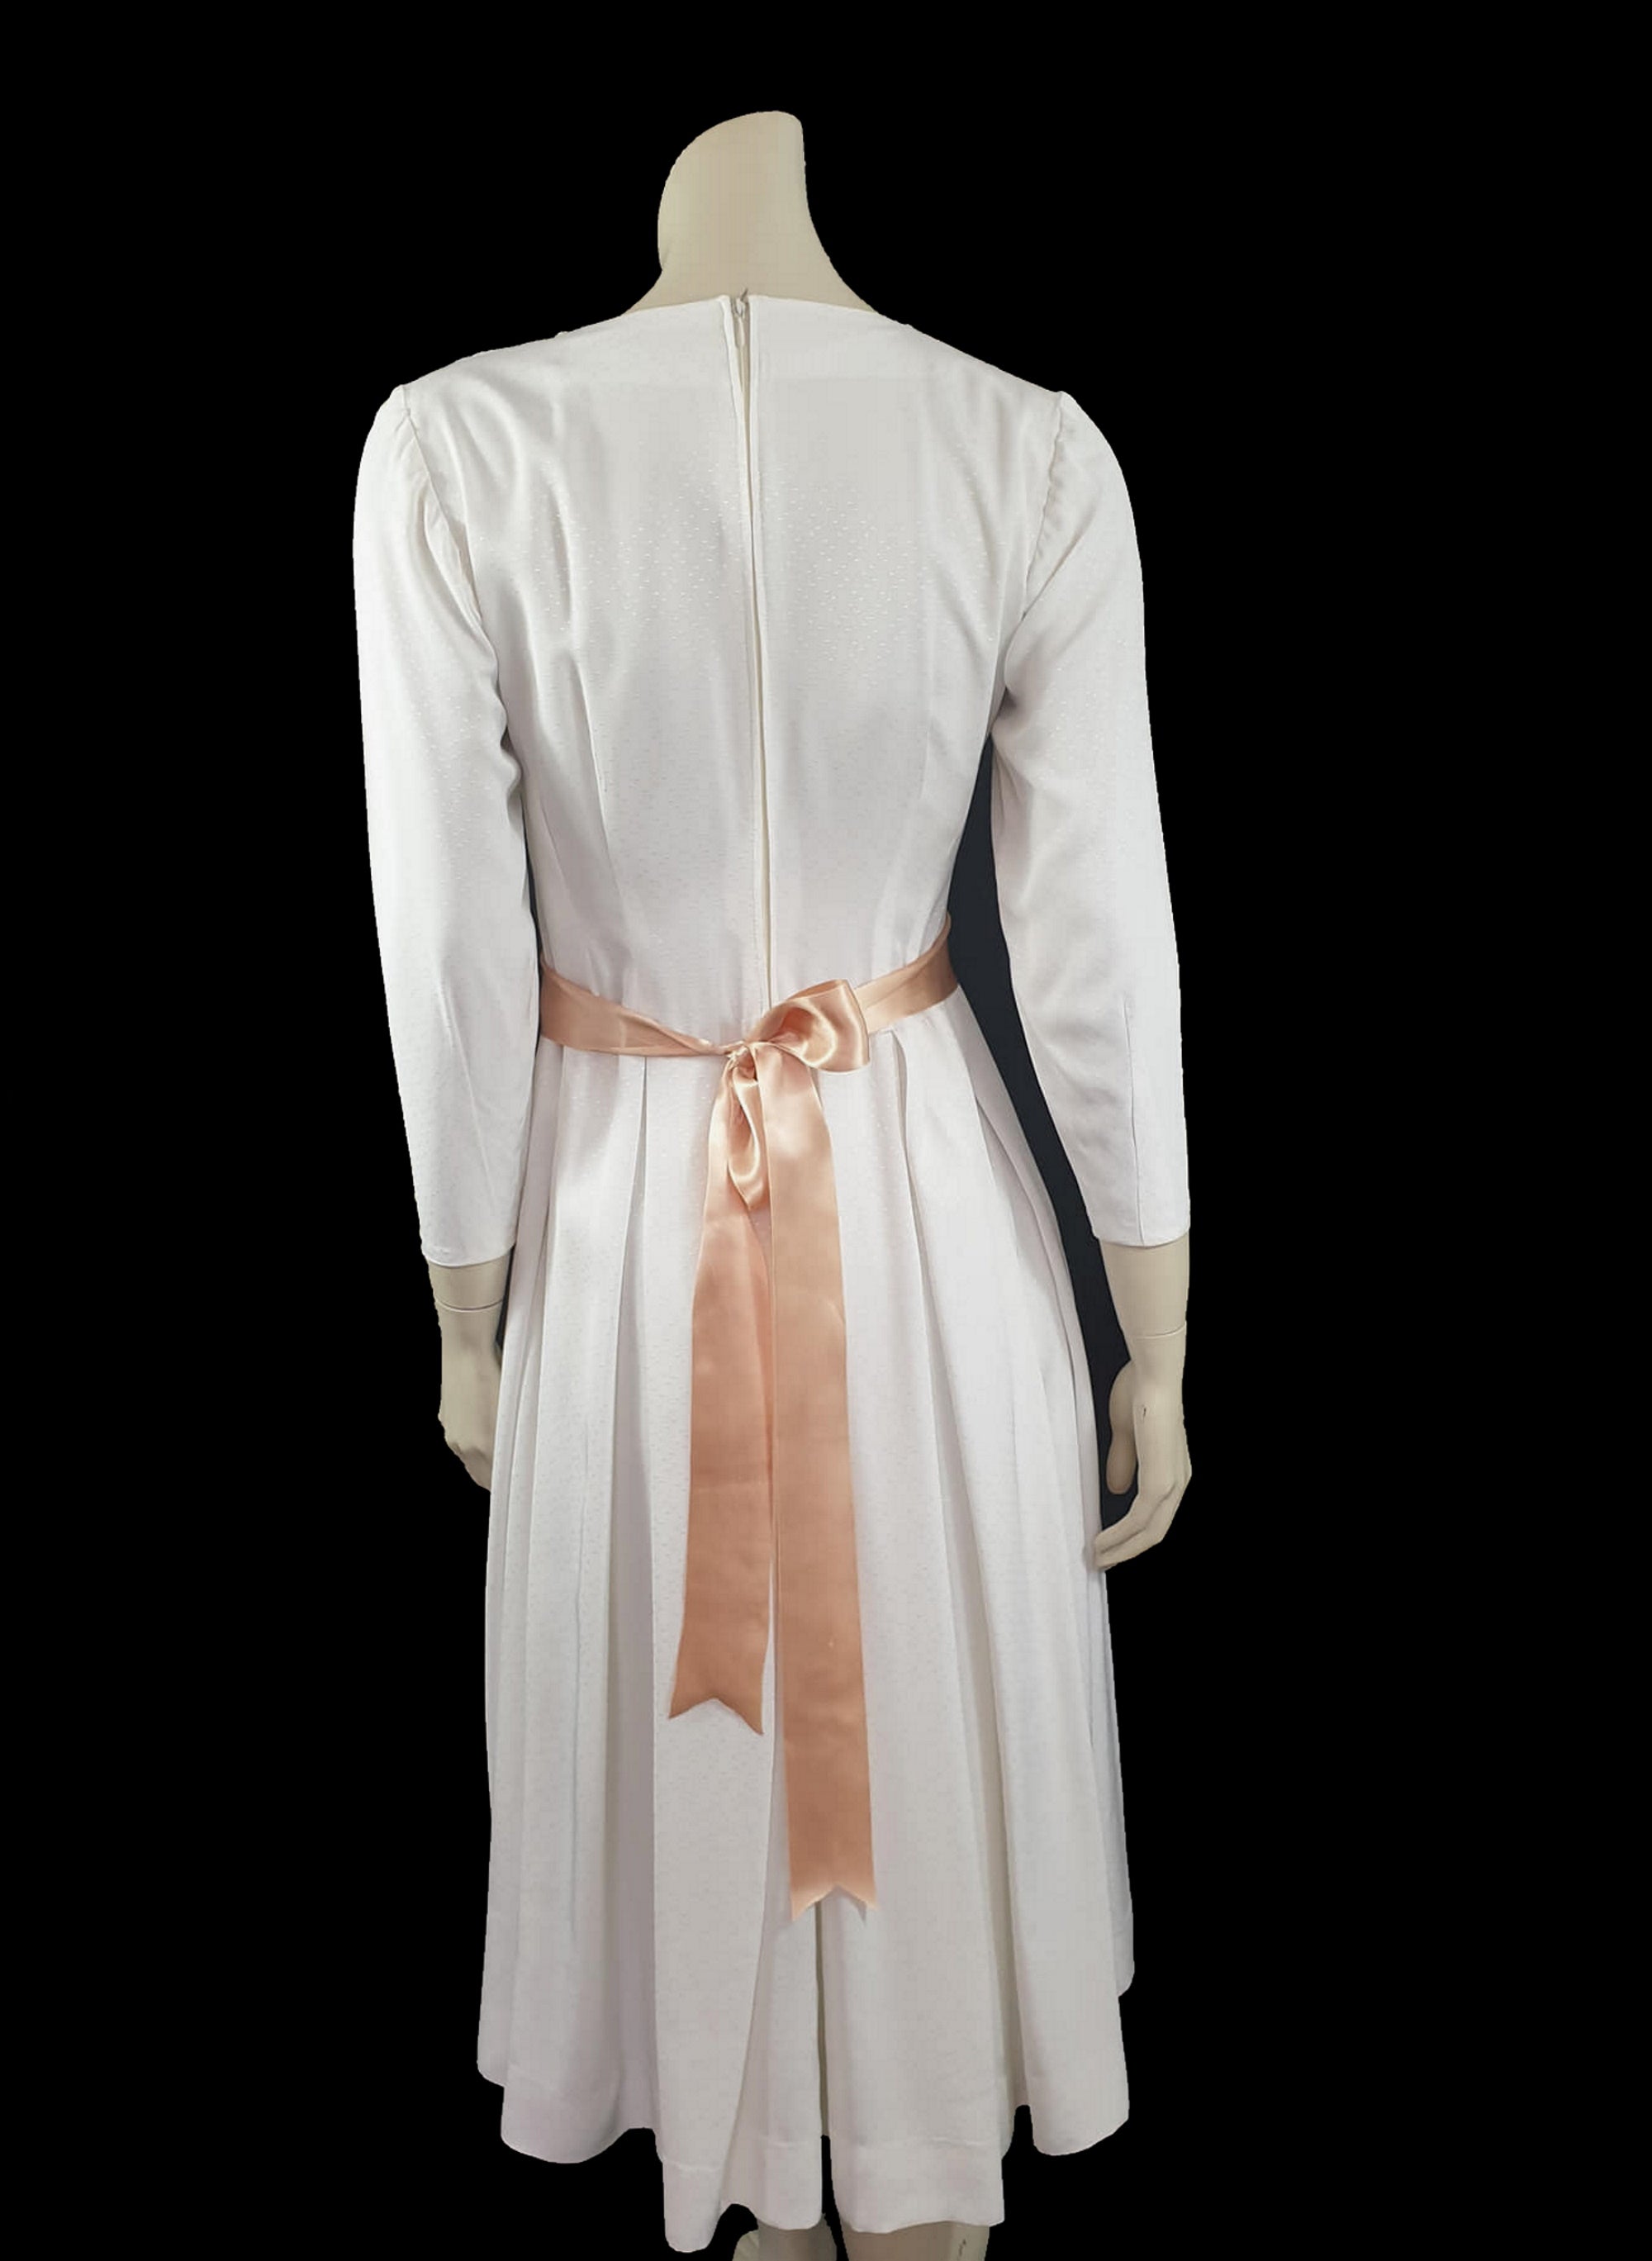 1960s white long sleeved dress with pleated skirt